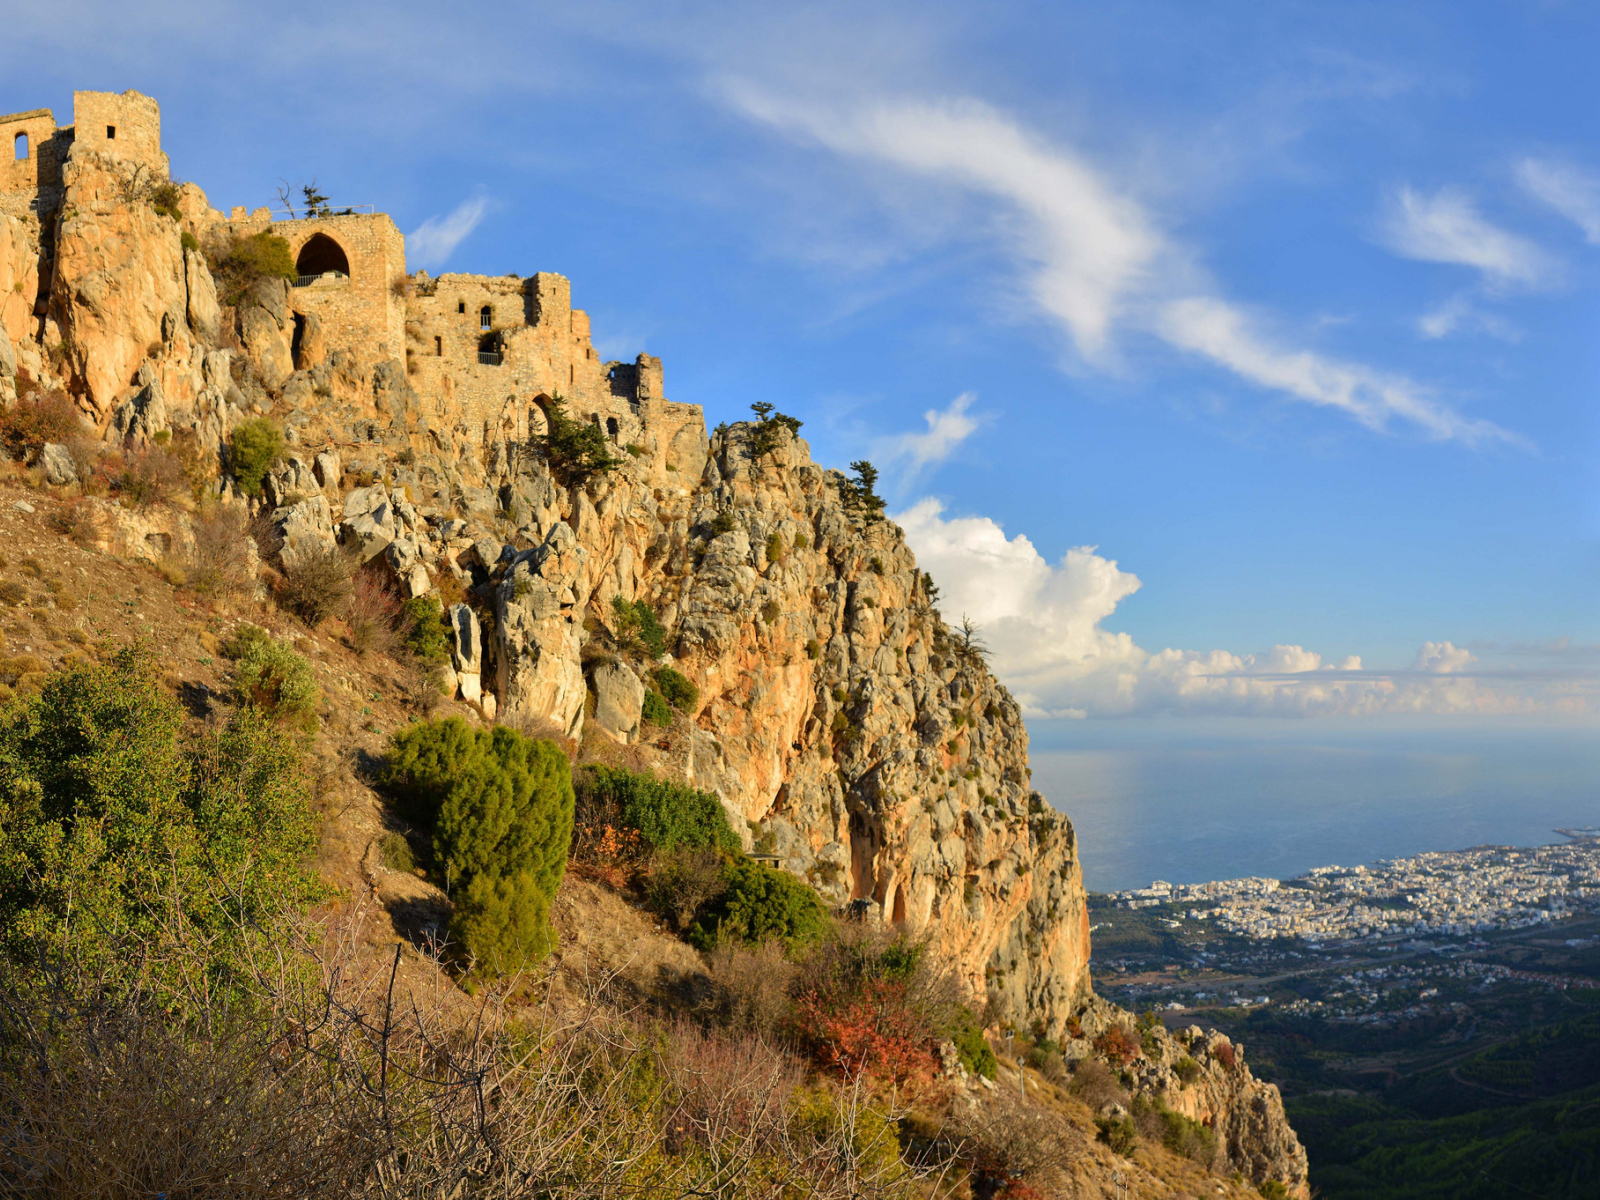 Magnificent views of the St. Hilarion Castle, North Cyprus